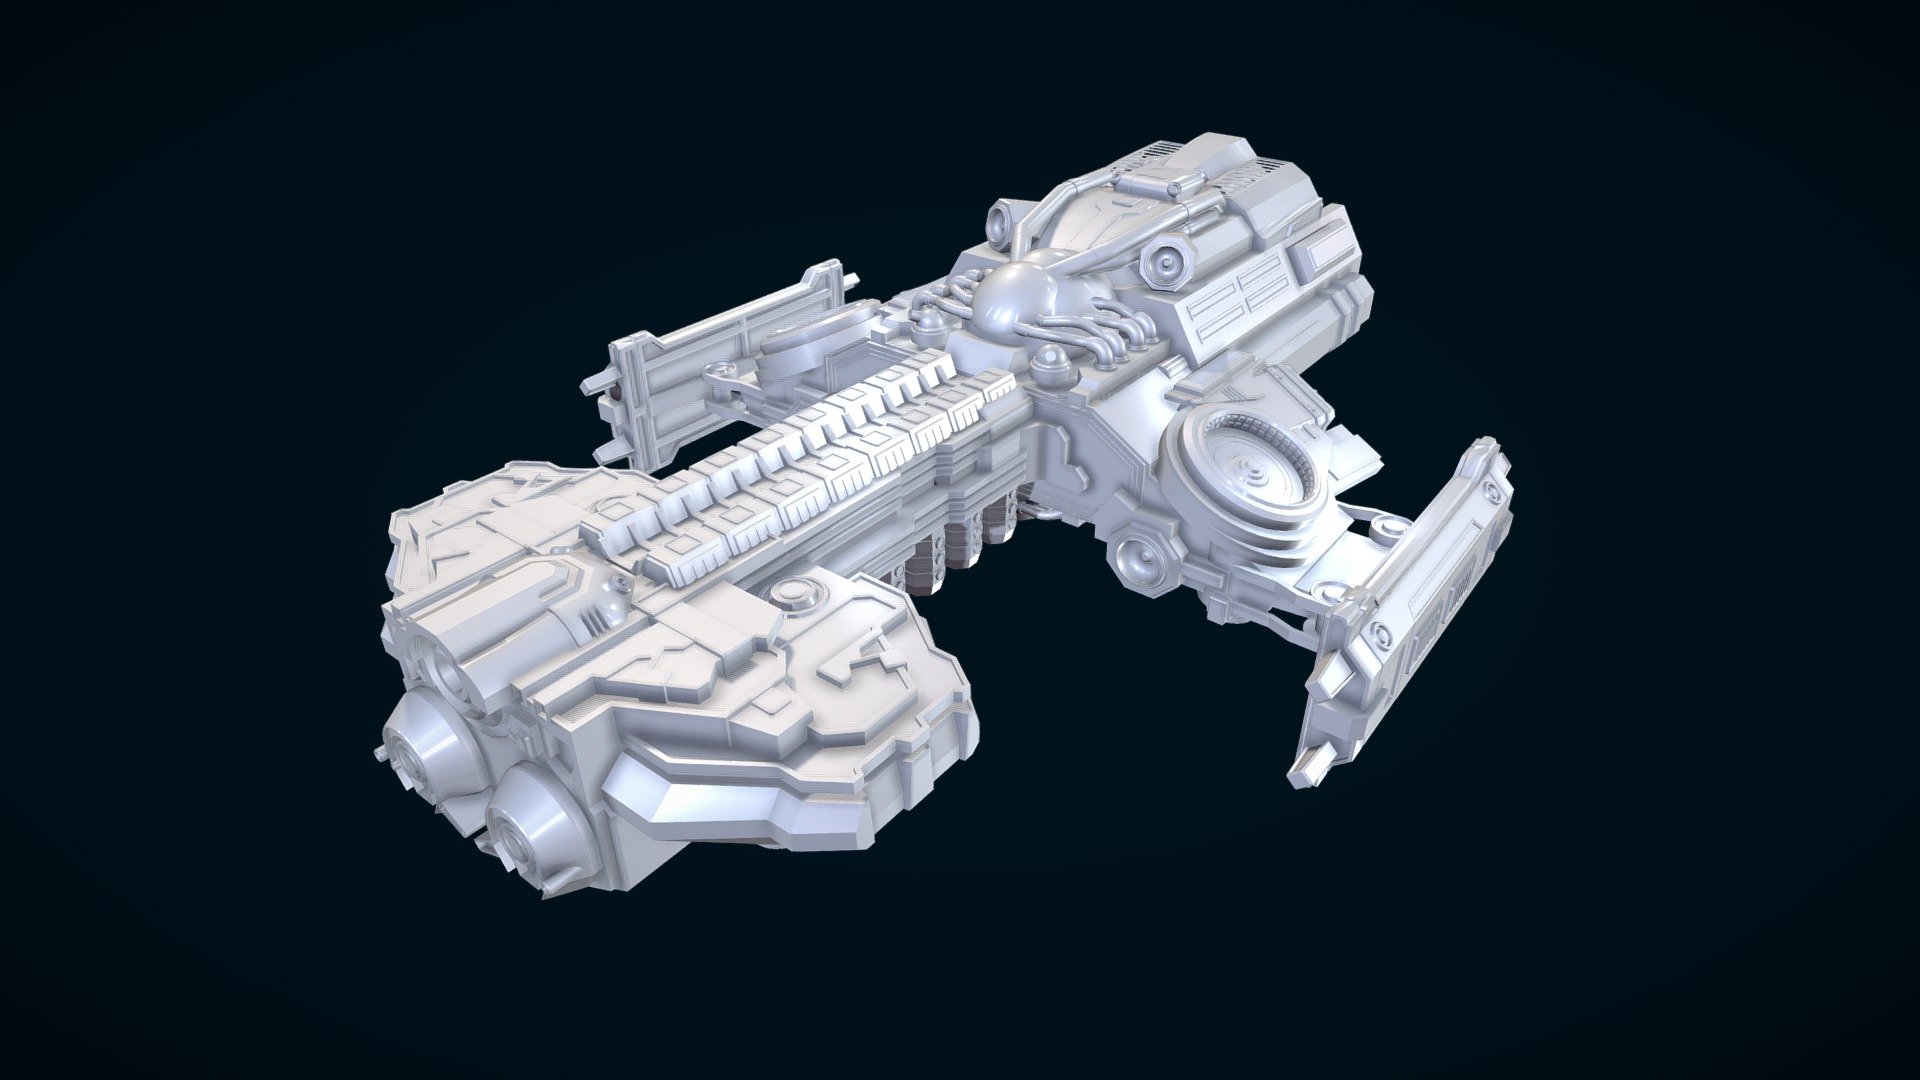 Starcraft - Battlecruiser Hyperion 3d Modeled in Sketchup
If you want to see the Live workshops were we made it check out the Youtube Channel:
Sketchup Aprendizaje Latinoamérica - Starcraft - Battlecruiser Hyperion - 3D model by Pablopcb 3d model